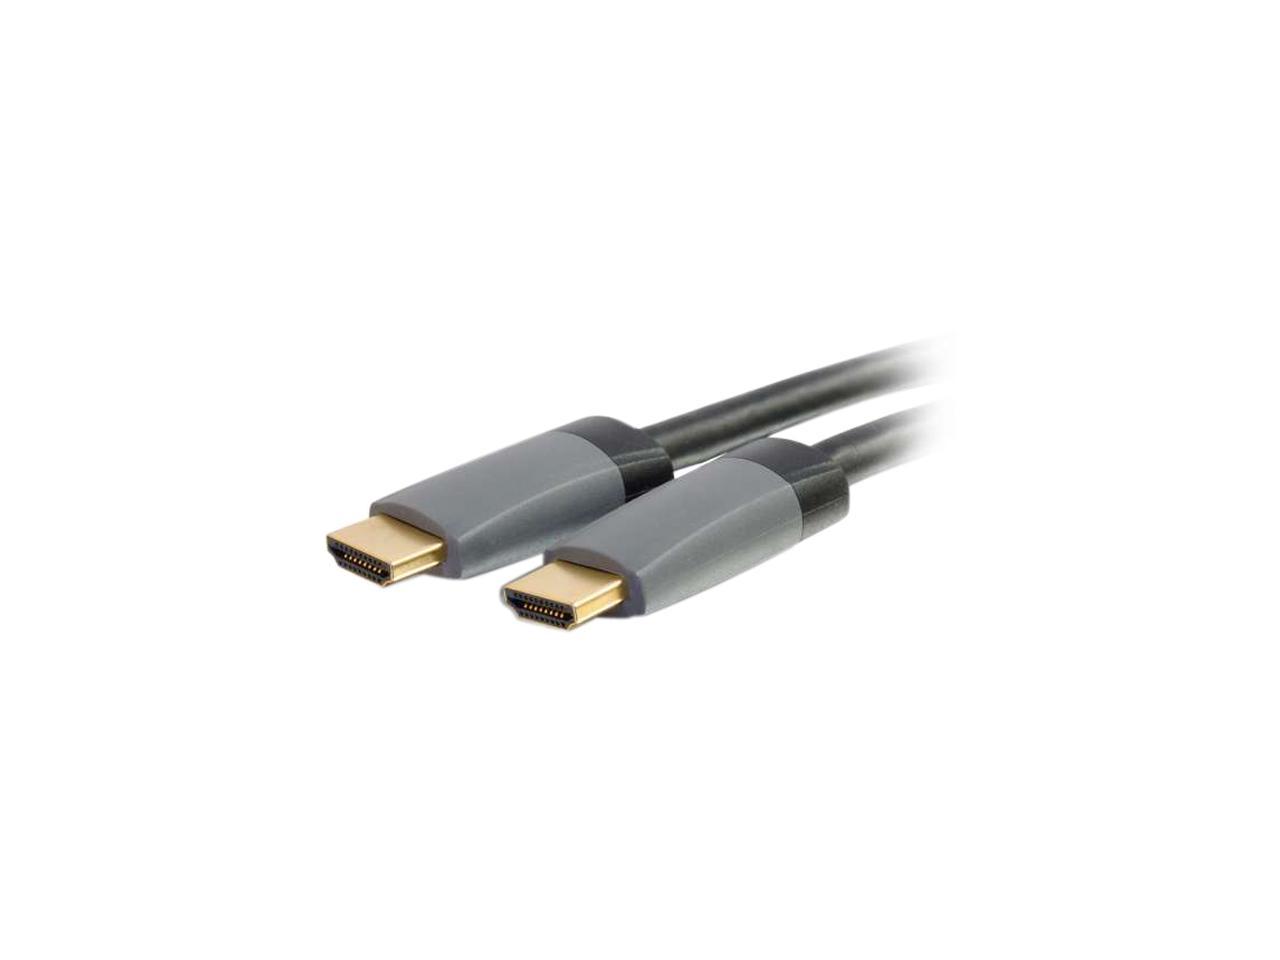 C2G 50633 Select 4K UHD High Speed HDMI Cable (60Hz) with Ethernet M/M, in-Wall CL2-Rated, Black (25 Feet, 7.62 Meters) - image 1 of 3